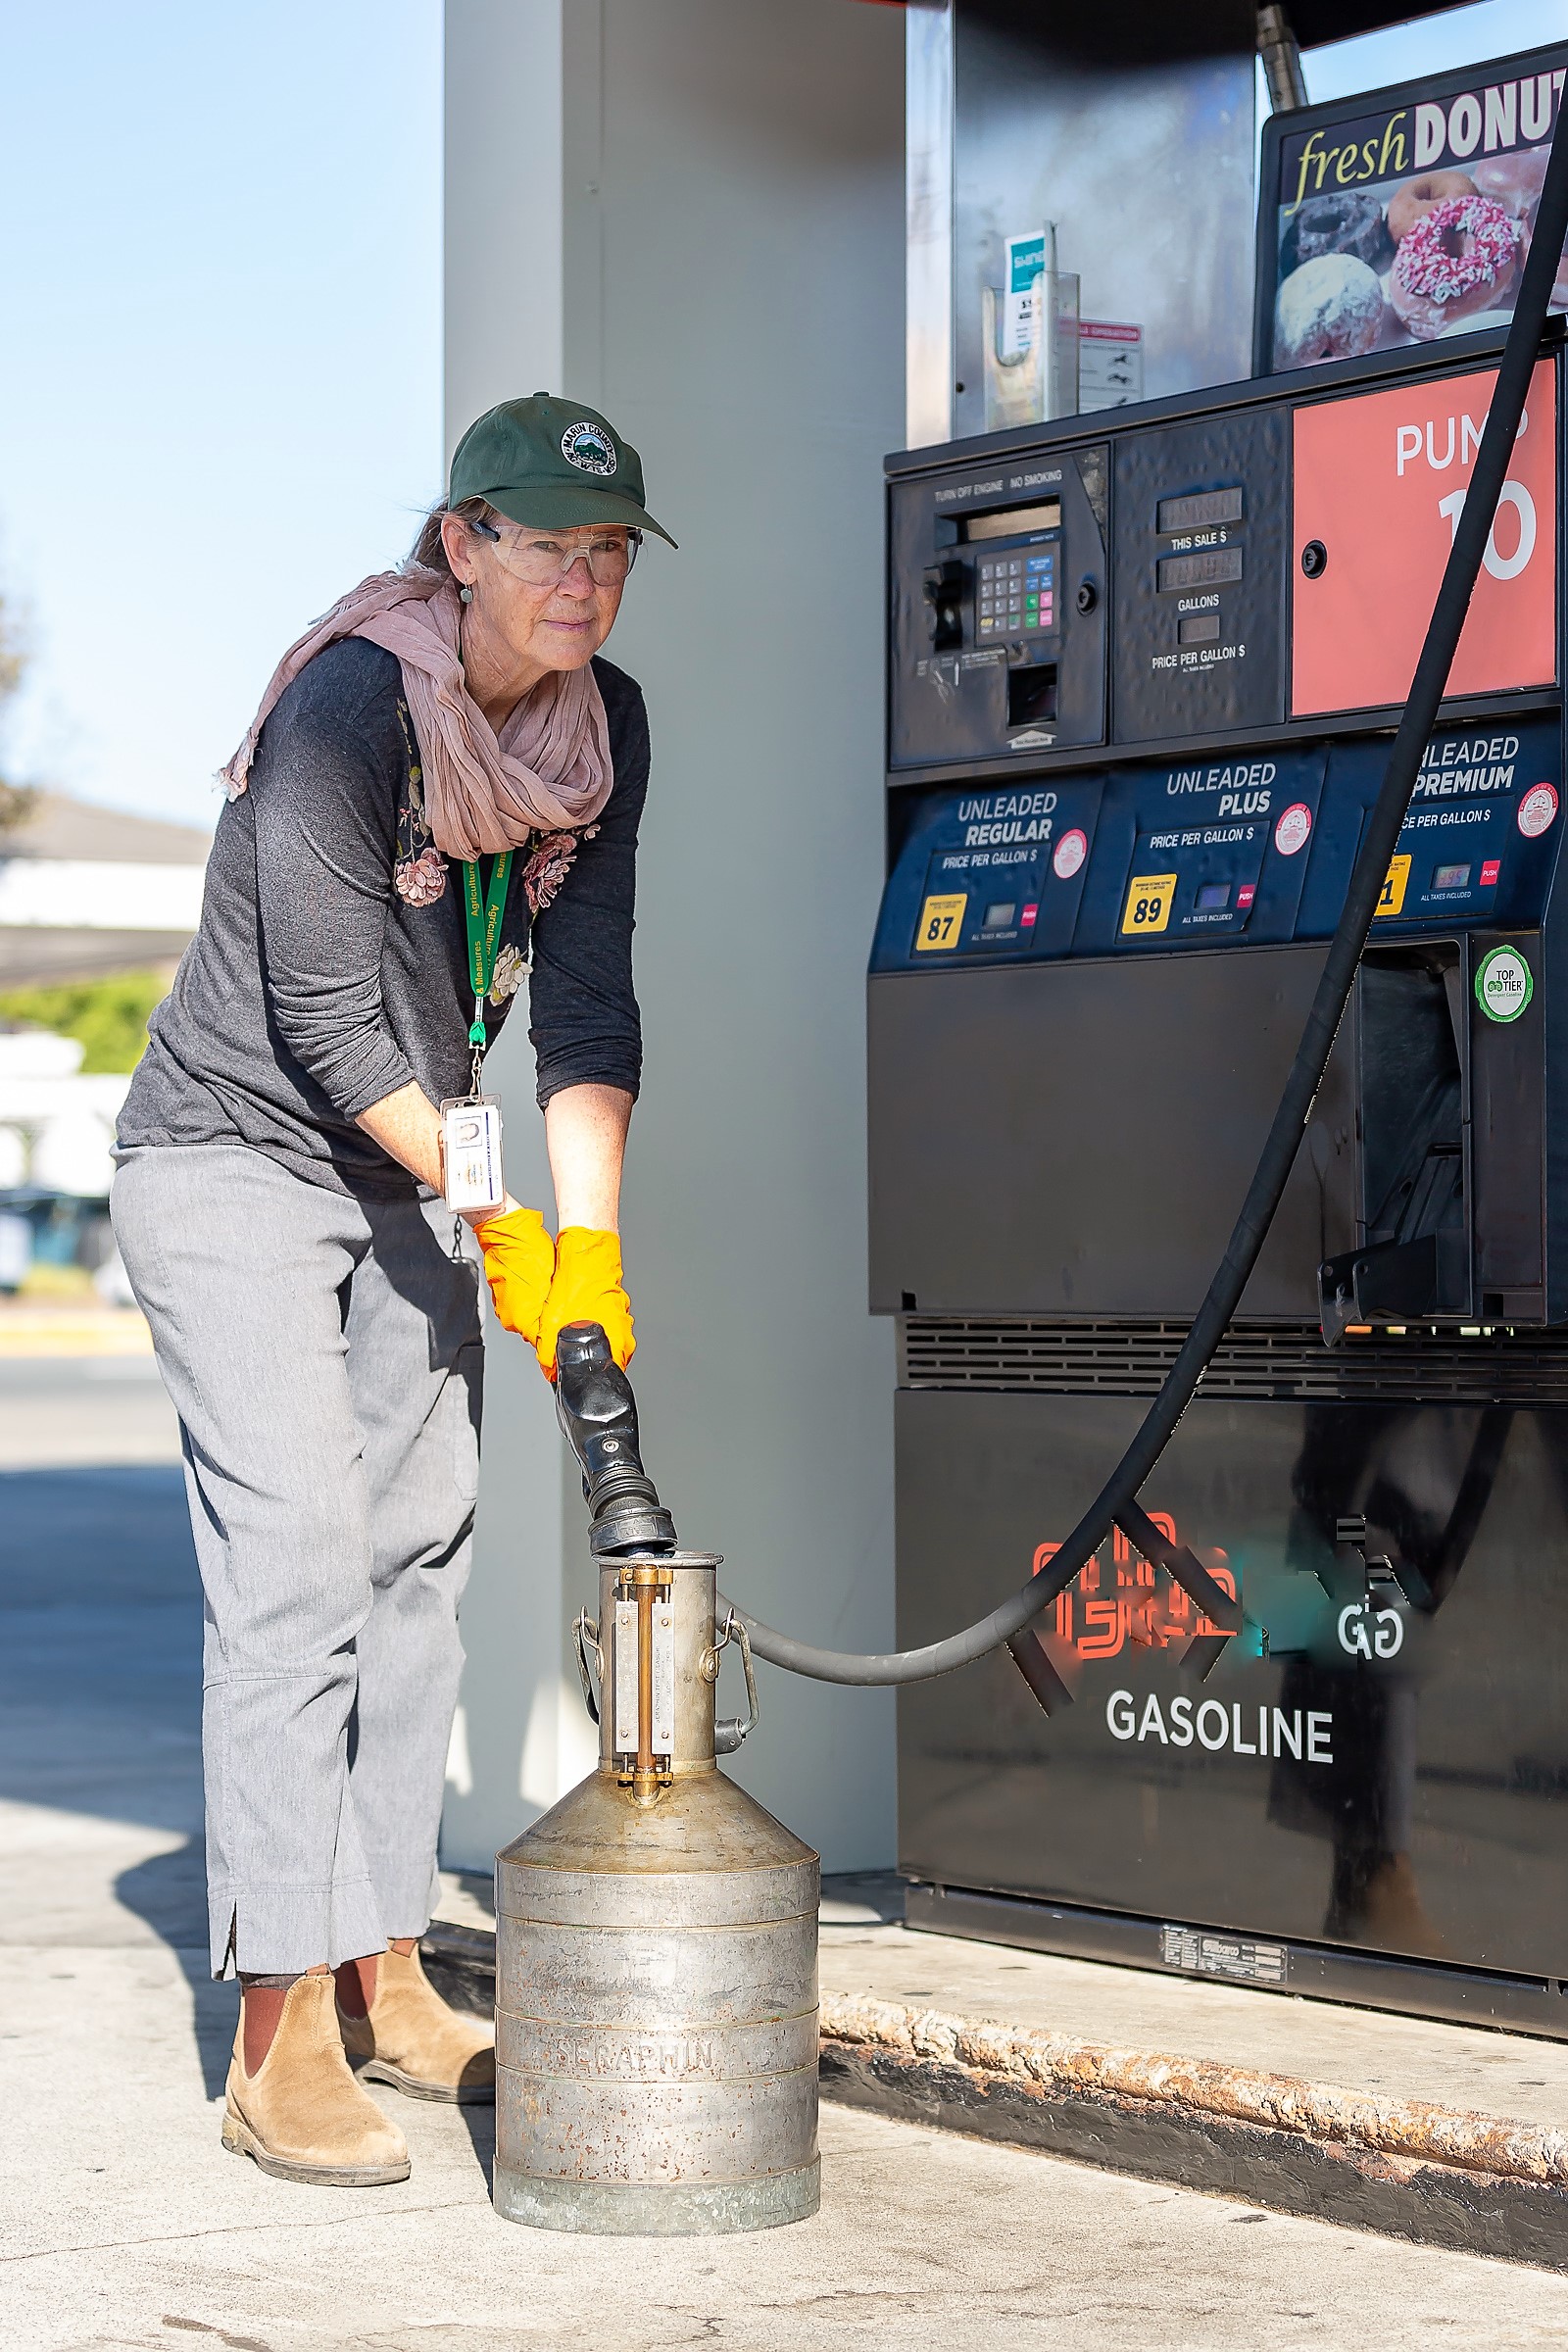 A female inspector fills a gasoline container with a gallon of gas at a service station.